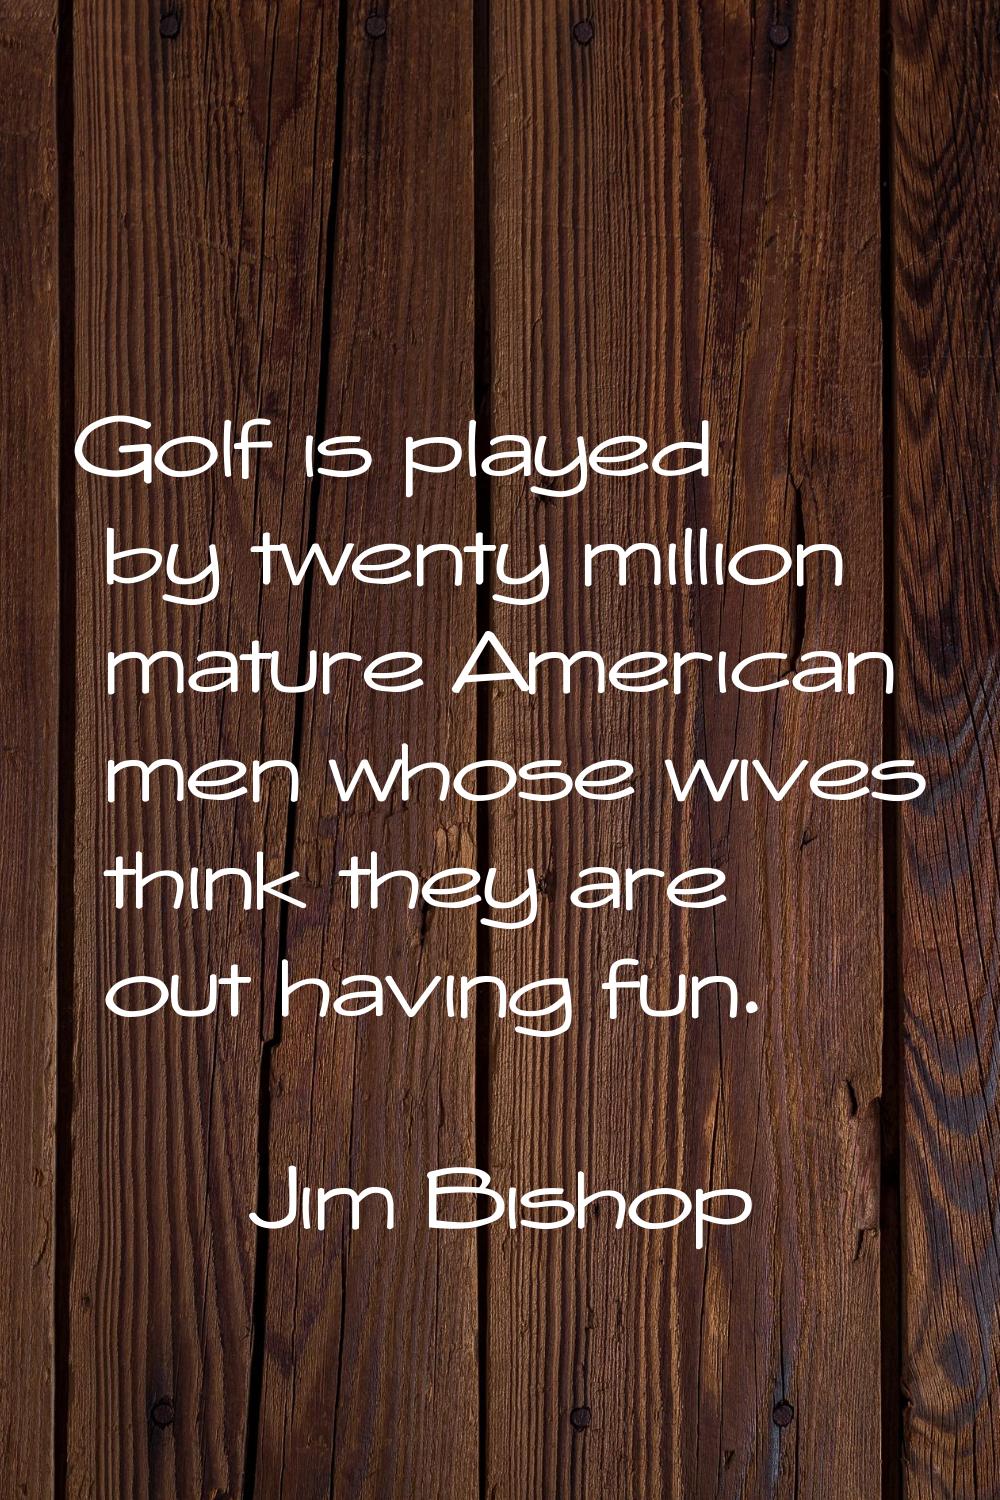 Golf is played by twenty million mature American men whose wives think they are out having fun.